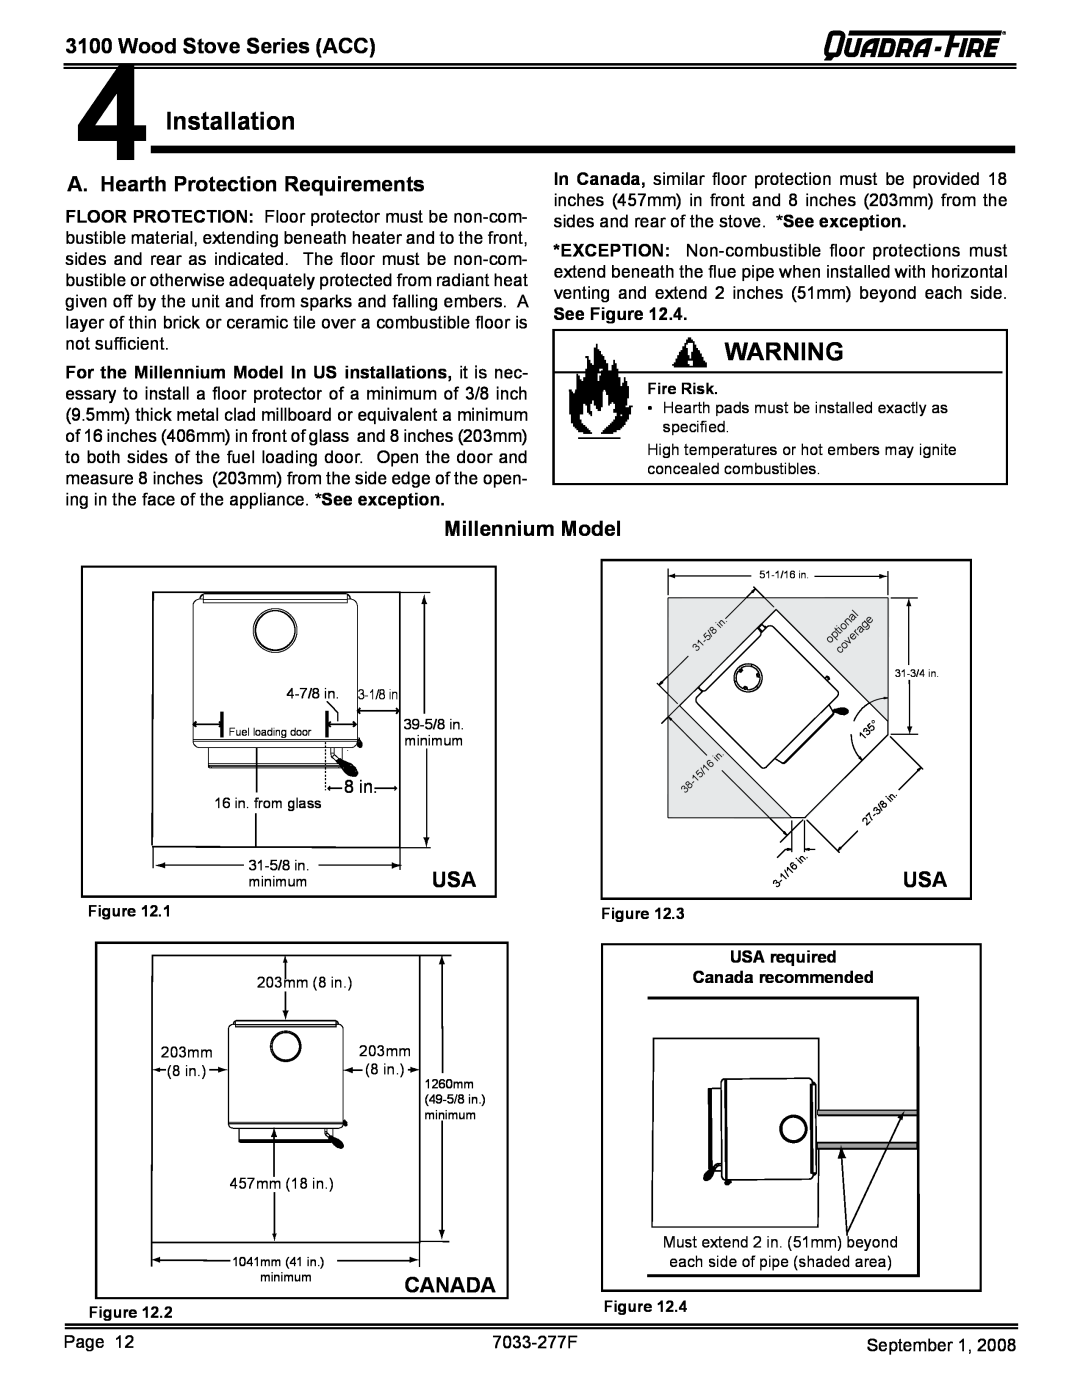 Hearth and Home Technologies 31ST-ACC Installation, 31004Wood Stove Series ACC, A. Hearth Protection Requirements, Canada 